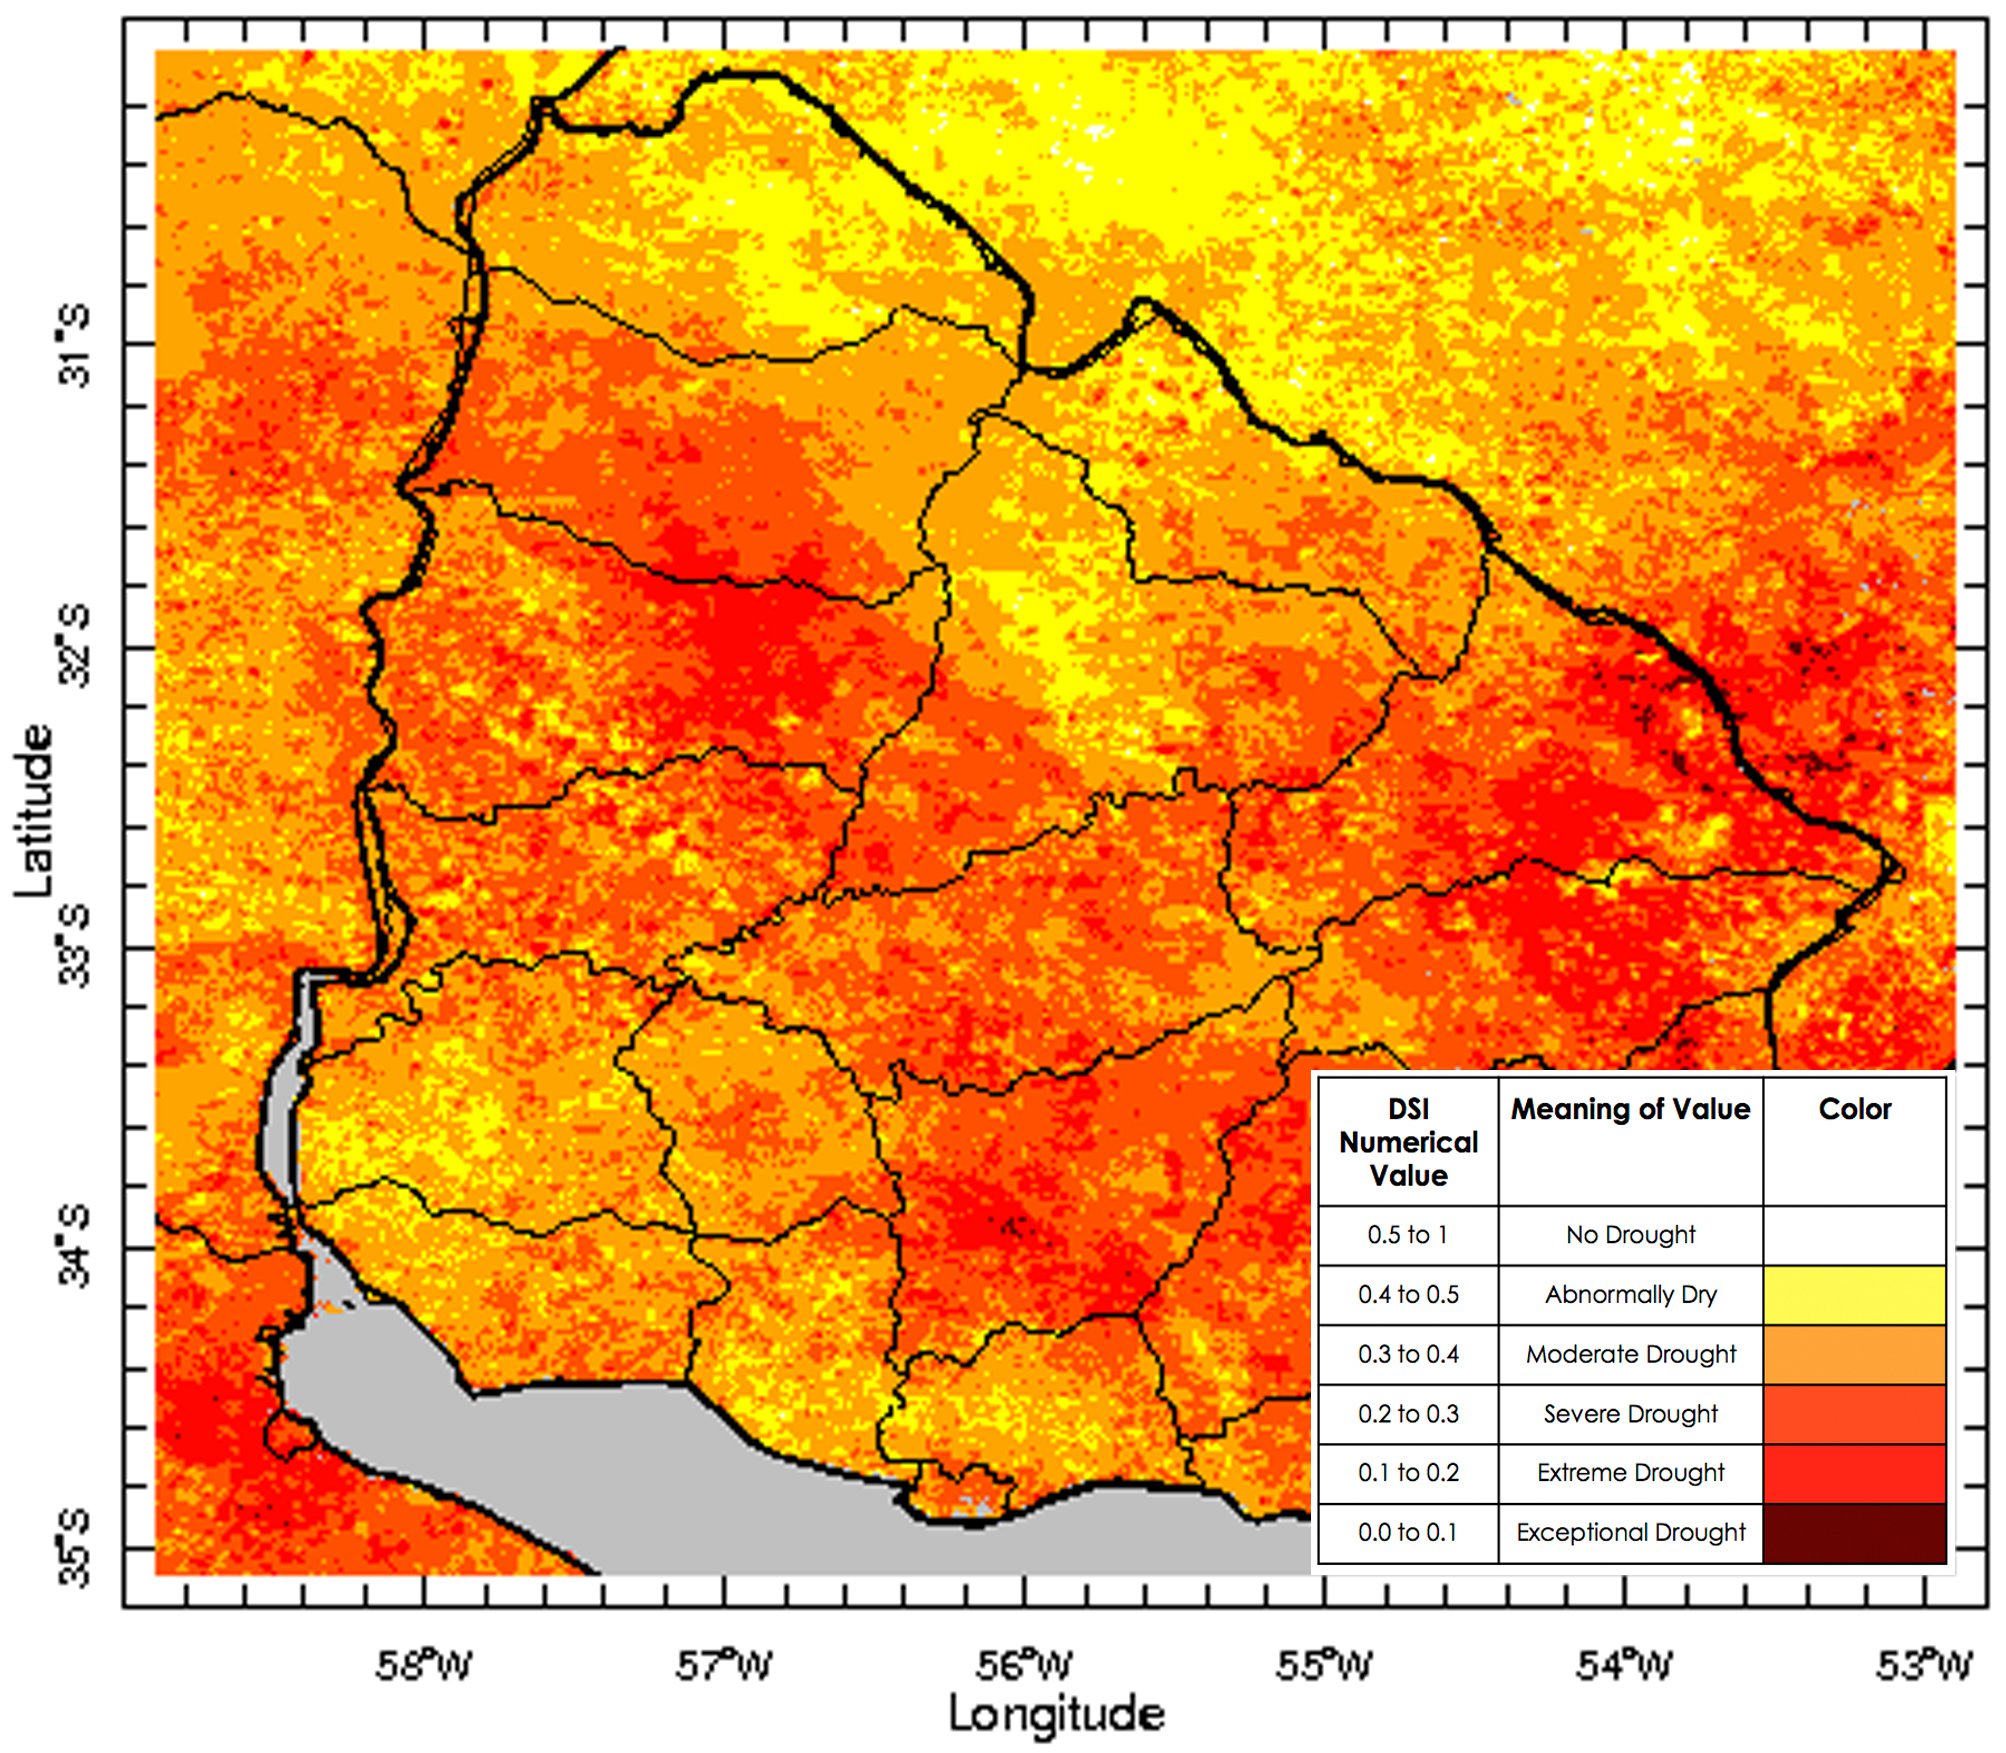 An image of the drought severity index created by the DEVELOP team using MODIS data.